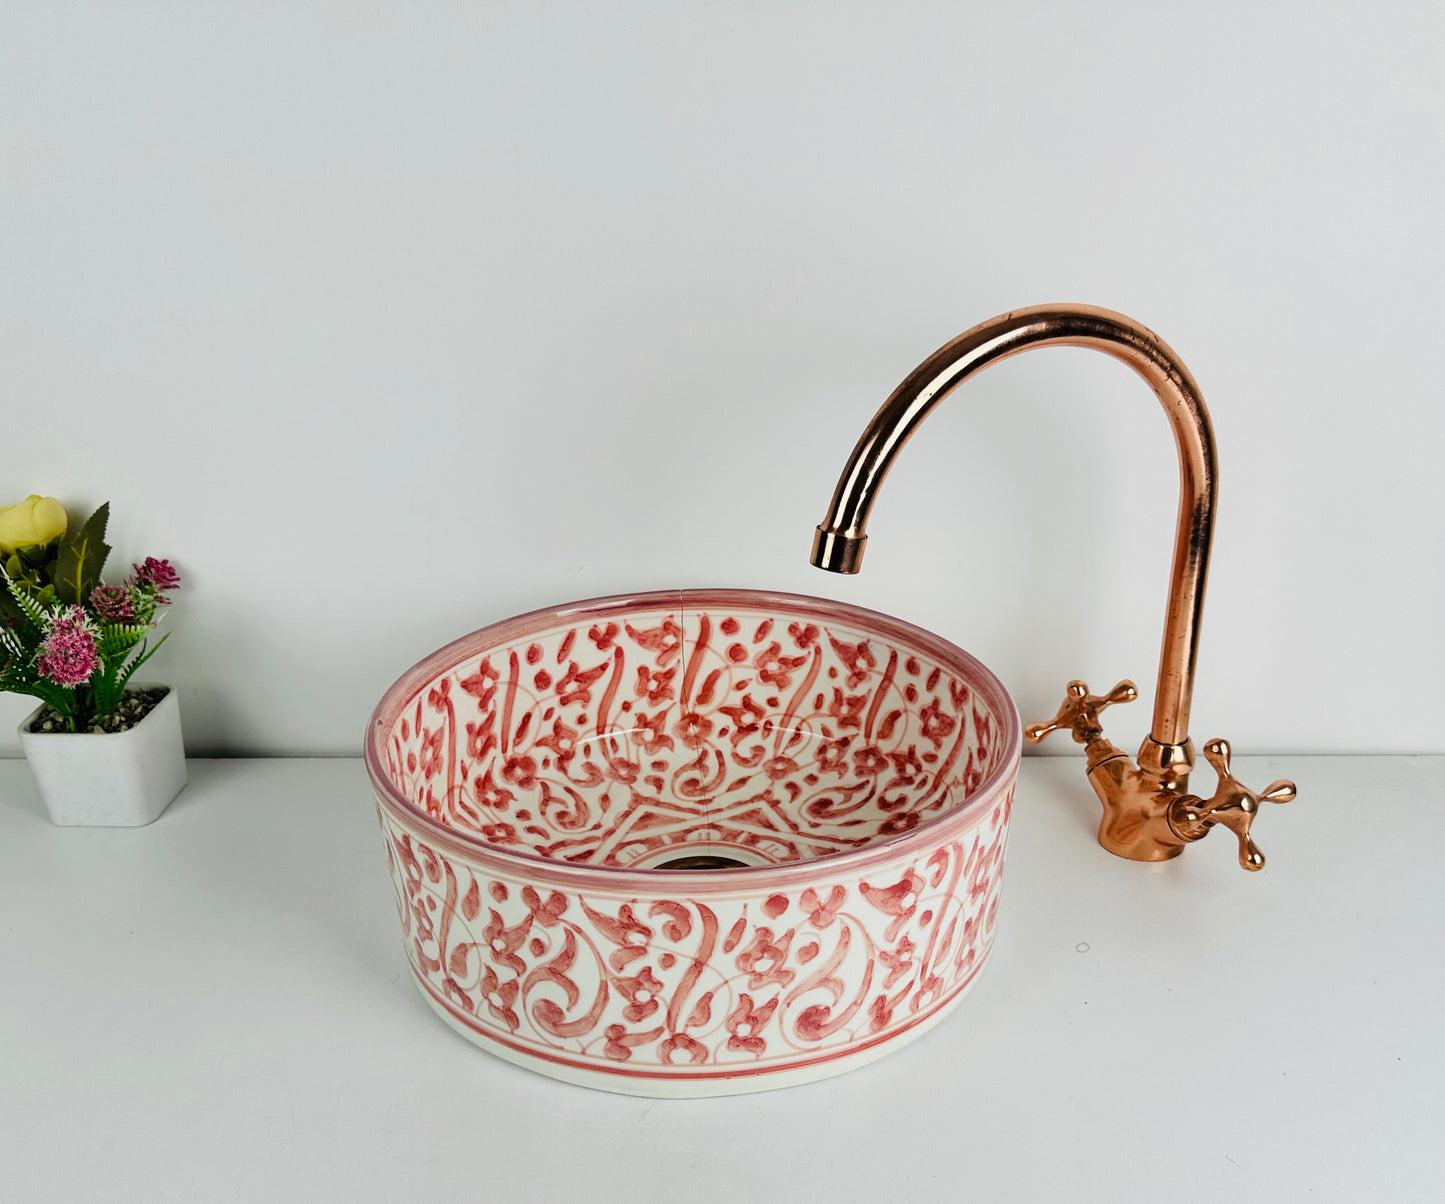 Blushing Red: Handcrafted Ceramic Sink in Blush Red Hue